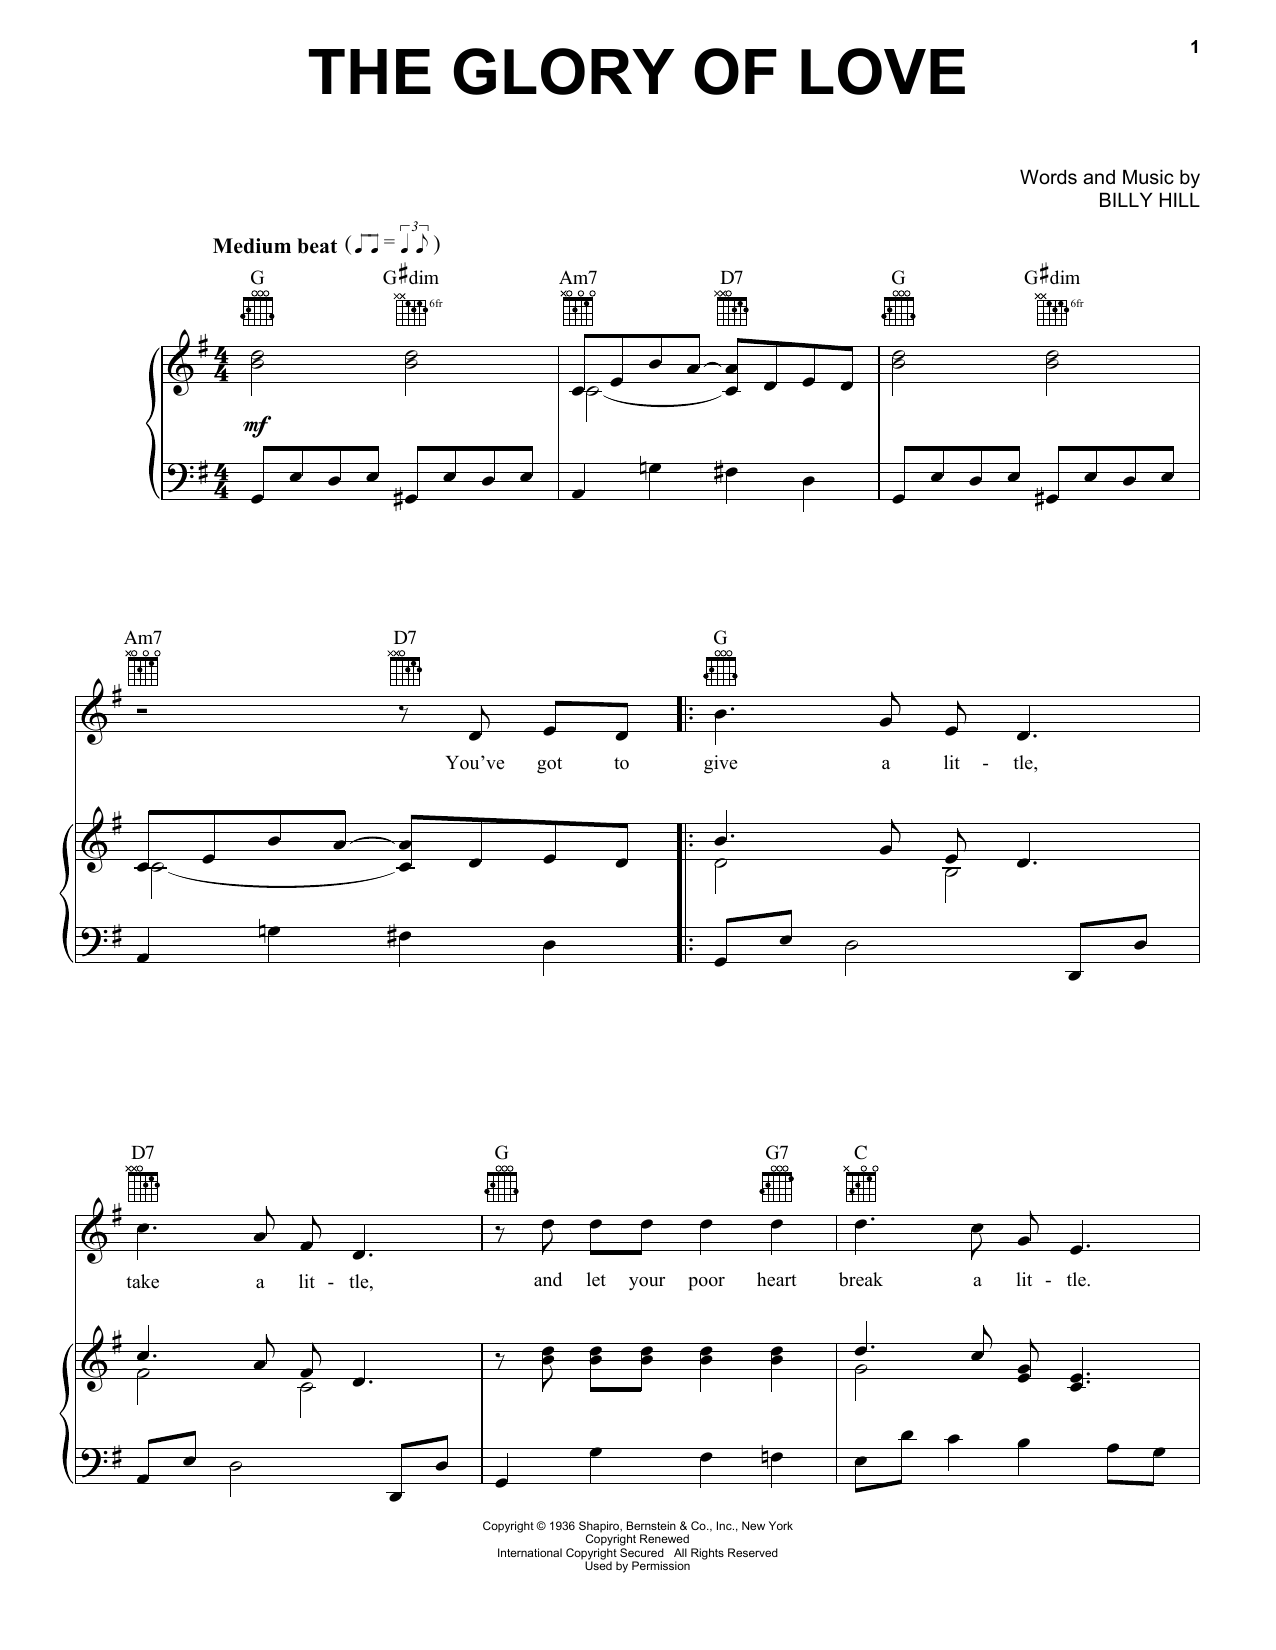 Count Basie The Glory Of Love sheet music notes printable PDF score